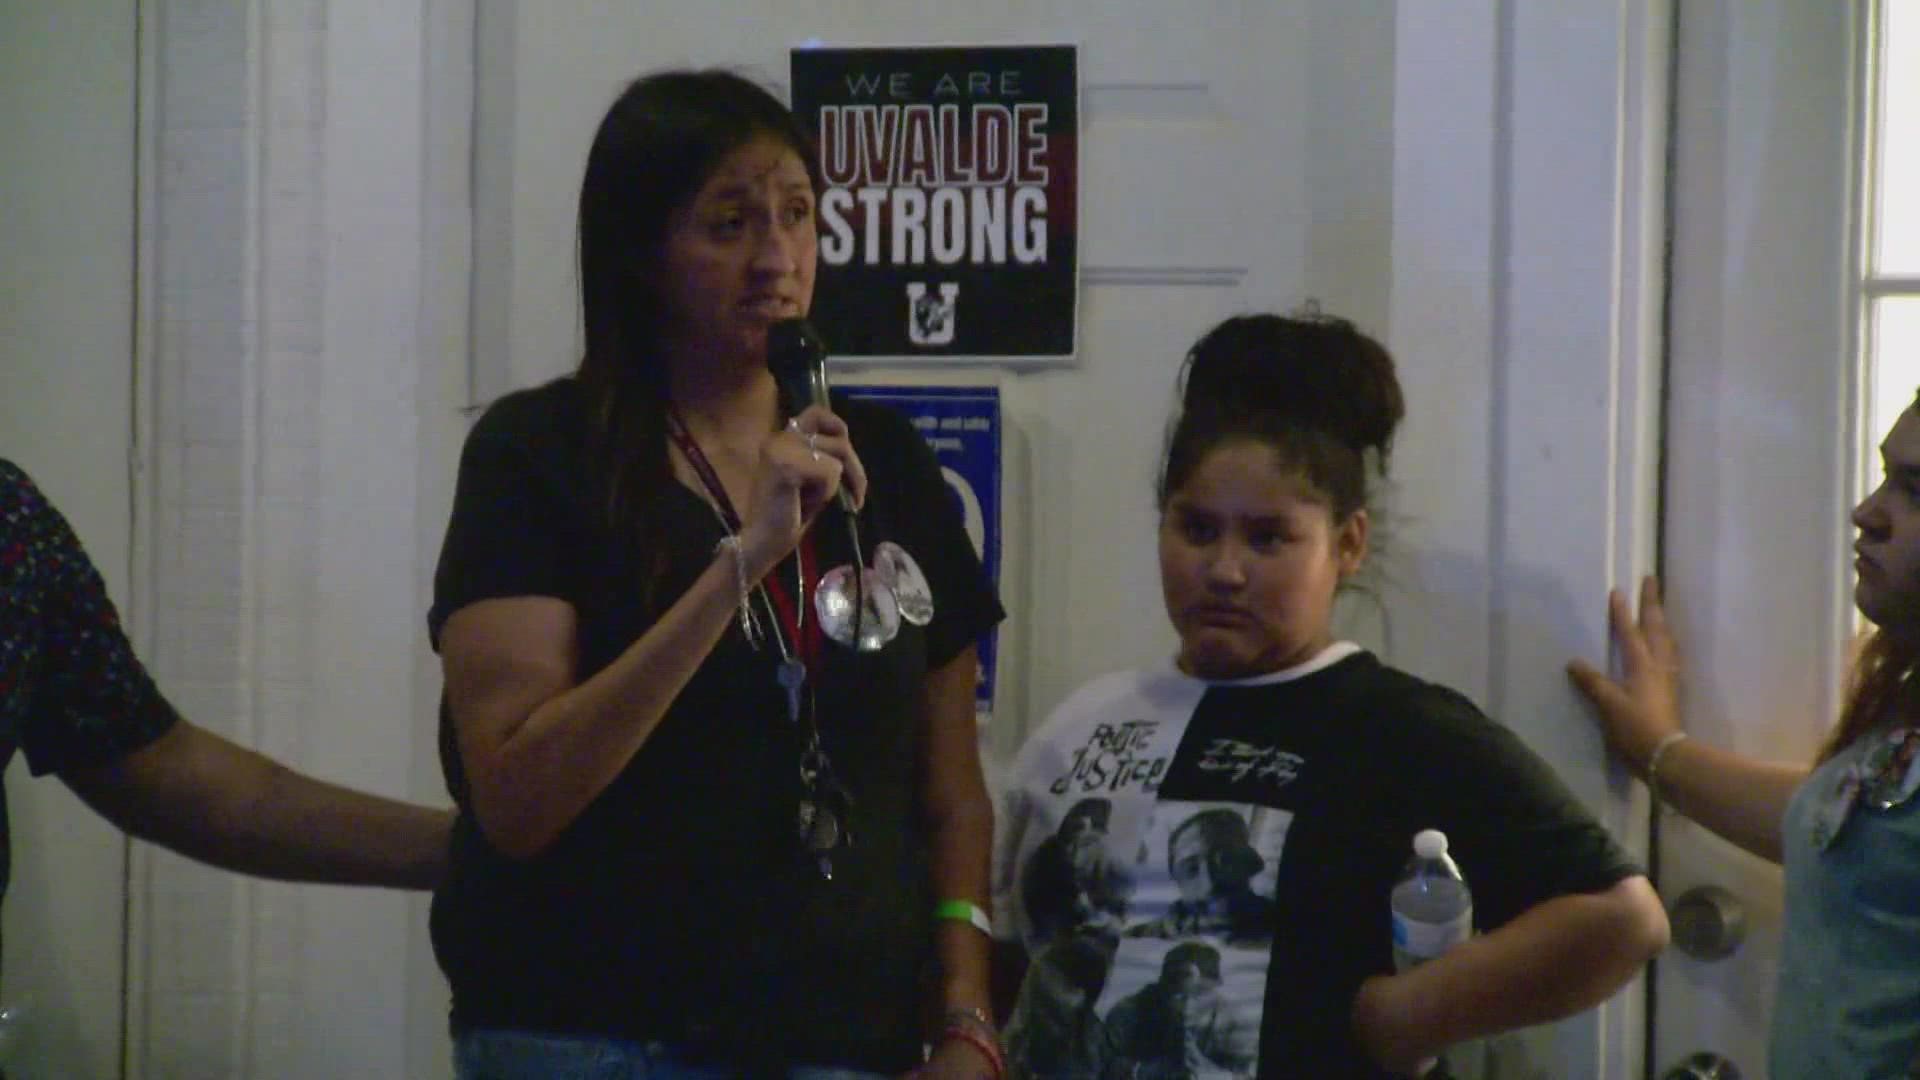 Annabell Rodriguez thanked the community for their support. The vigil was hosted by a pediatrician who had cared for several of the children who were killed.